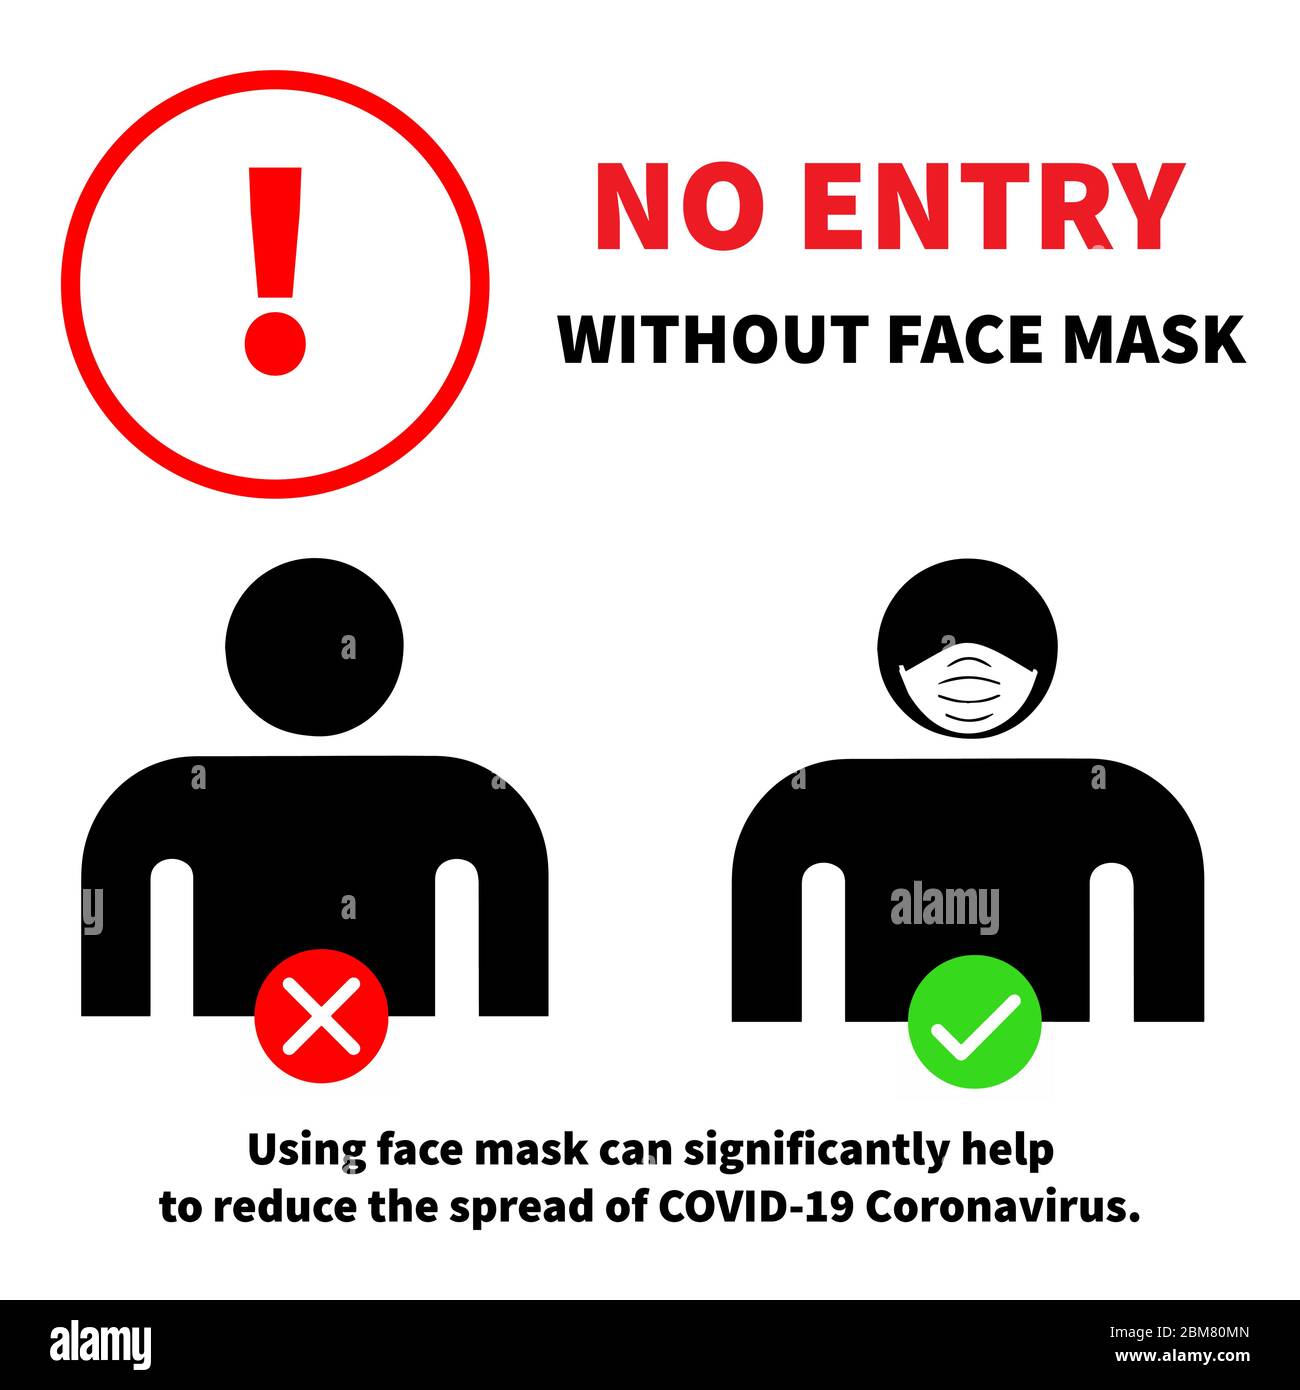 No entry without face mask vector illustration Stock Vector